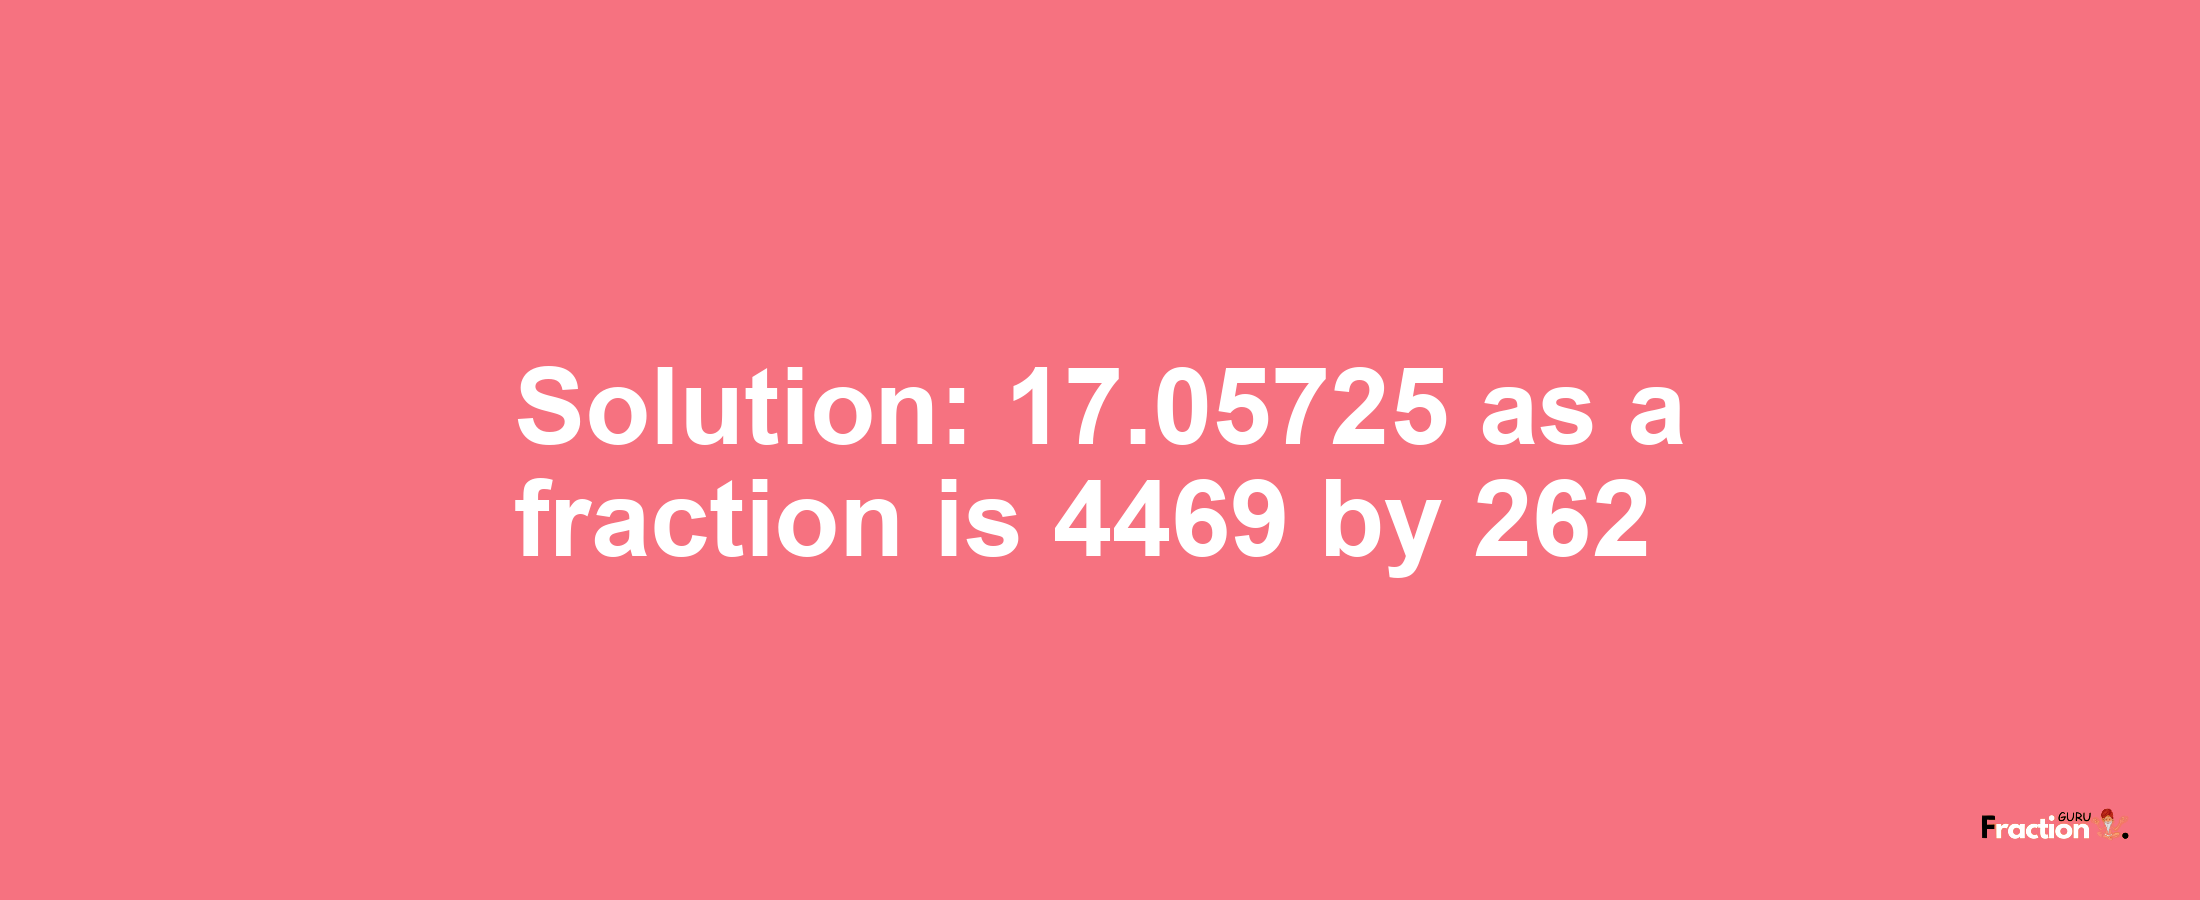 Solution:17.05725 as a fraction is 4469/262